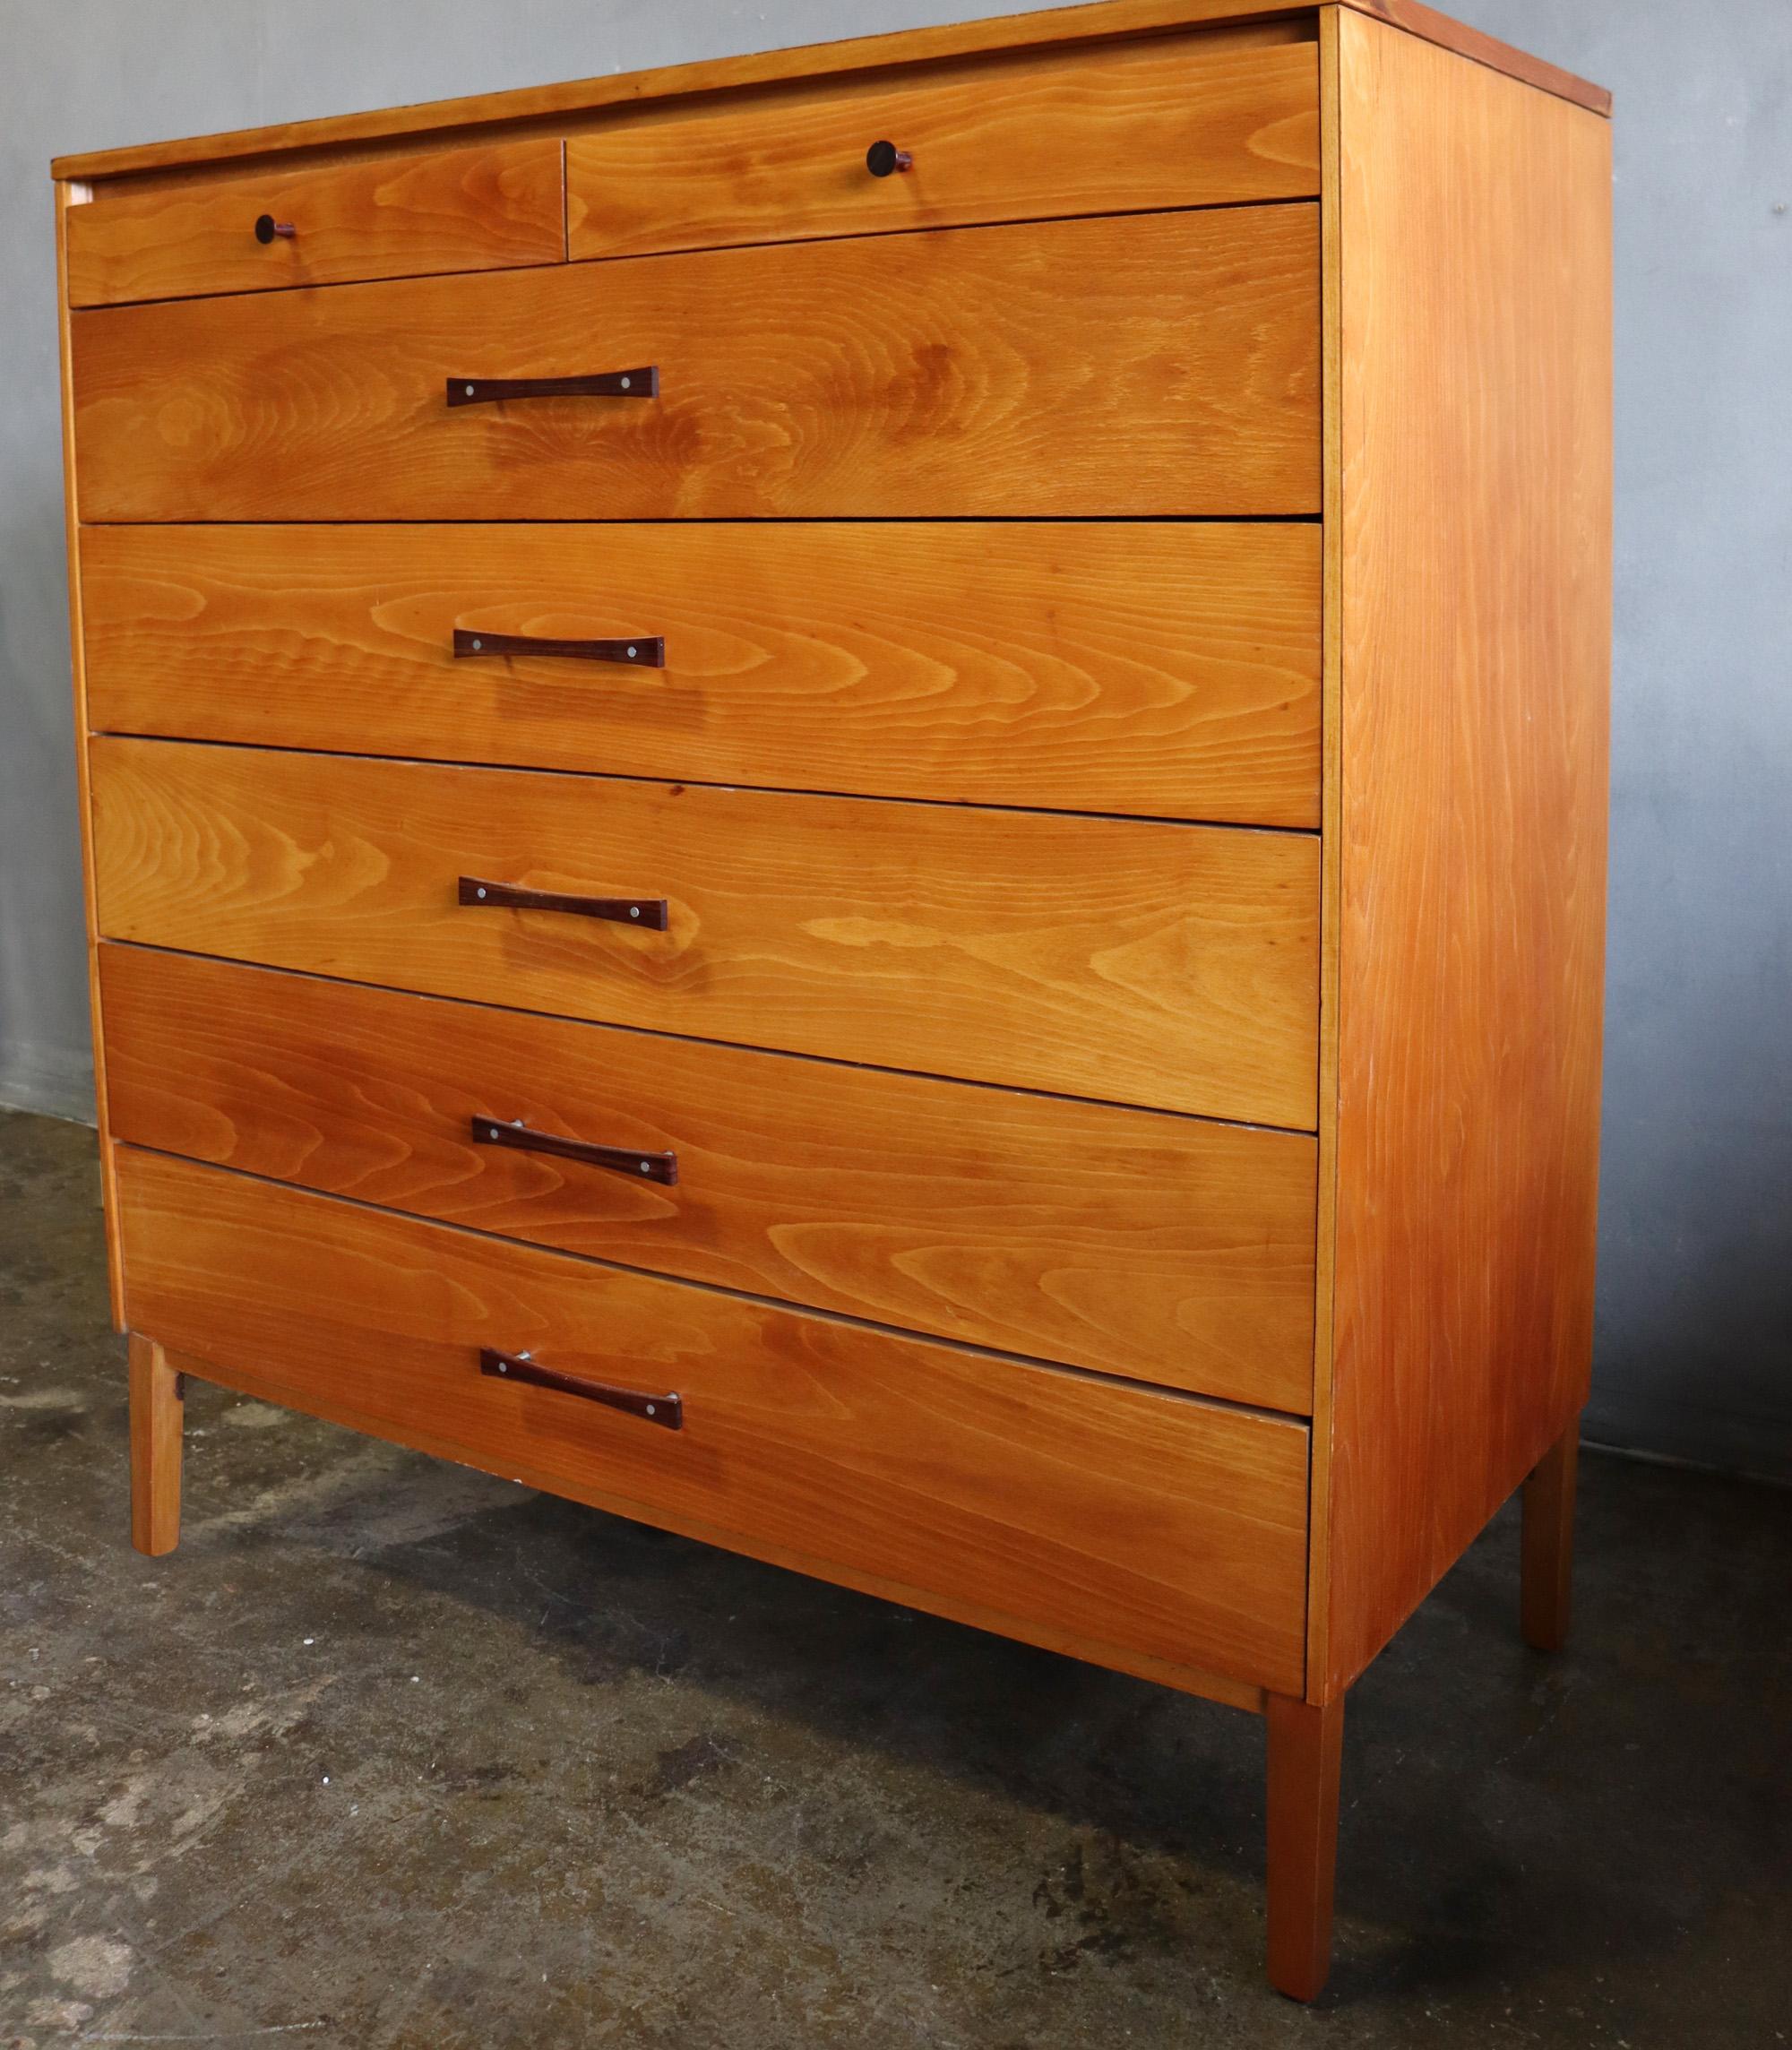 For your consideration is this Tallboy dresser Designed by Paul McCobb 